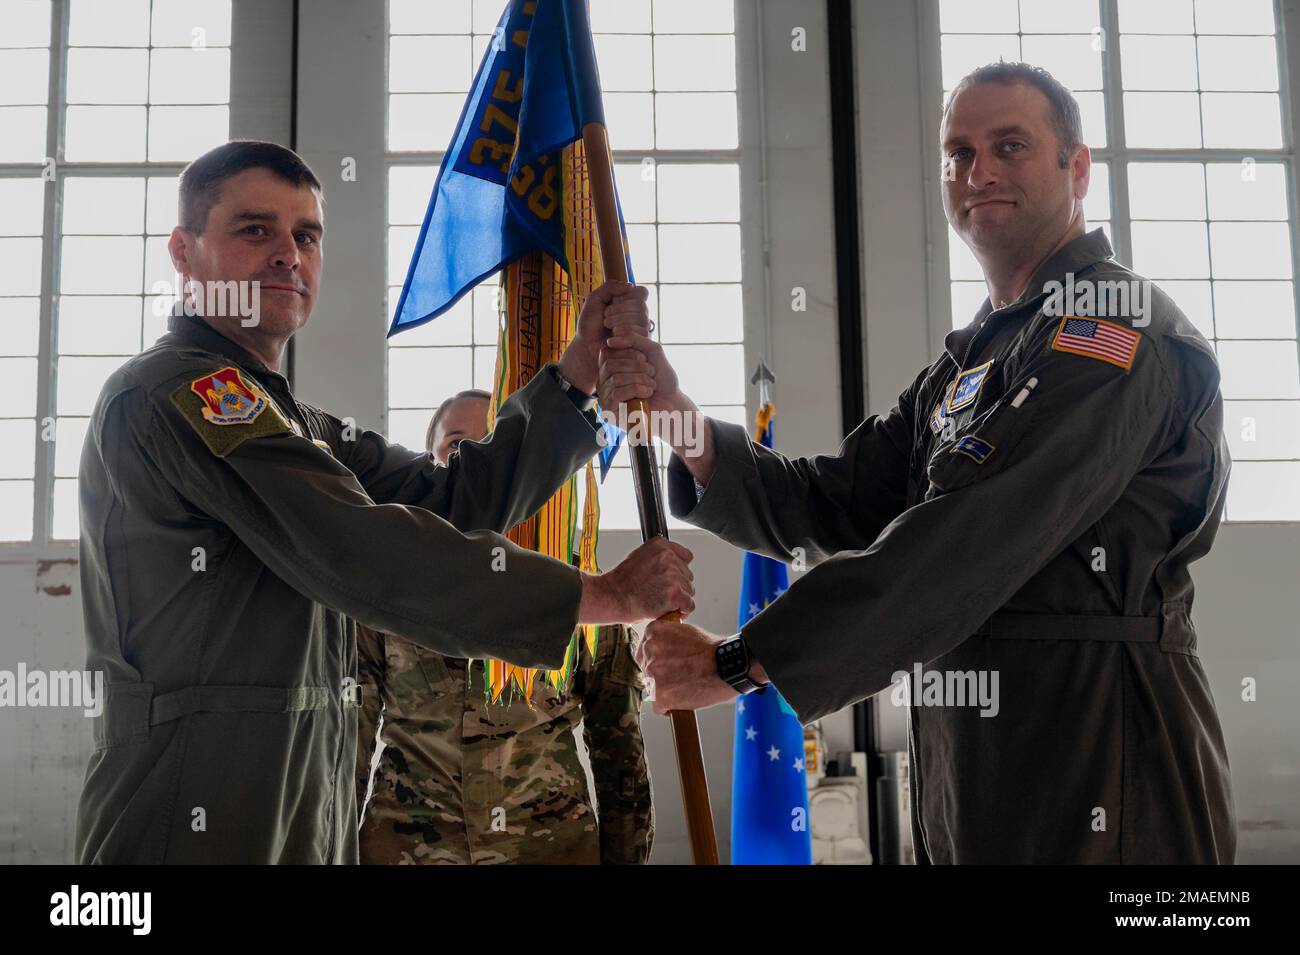 U.S. Air Force Col. Bradely Stevens, 375th Operations Group commander, hands the 458th Airlift Squadron guidon to Lt. Col. Geoffrey Goldsmith, 458th AS incoming commander, during the 458th AS Change of Command at Hangar 3 on Scott Air Force Base, Illinois, May 26, 2022. The ceremony represents a time-honored military tradition providing an opportunity for Airmen to witness the transfer of power to their newly appointed commanding officer. (U.S. Air Force Airman 1st Class Mark Sulaica) Stock Photo